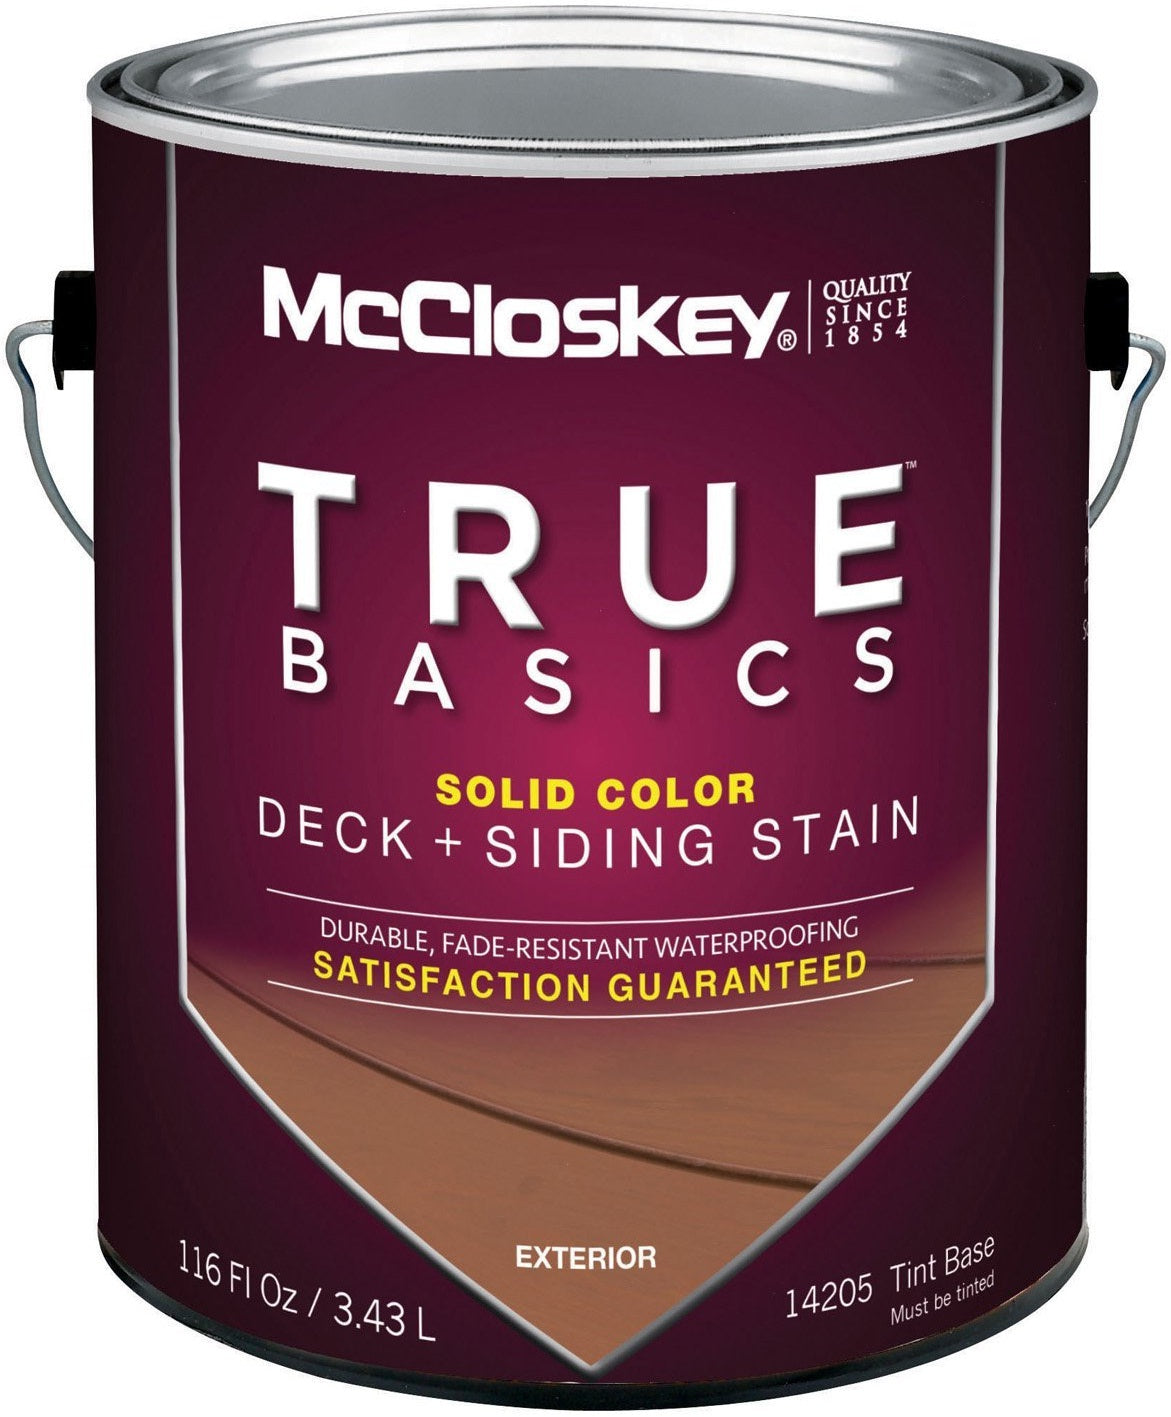 buy exterior stains & finishes at cheap rate in bulk. wholesale & retail painting gadgets & tools store. home décor ideas, maintenance, repair replacement parts